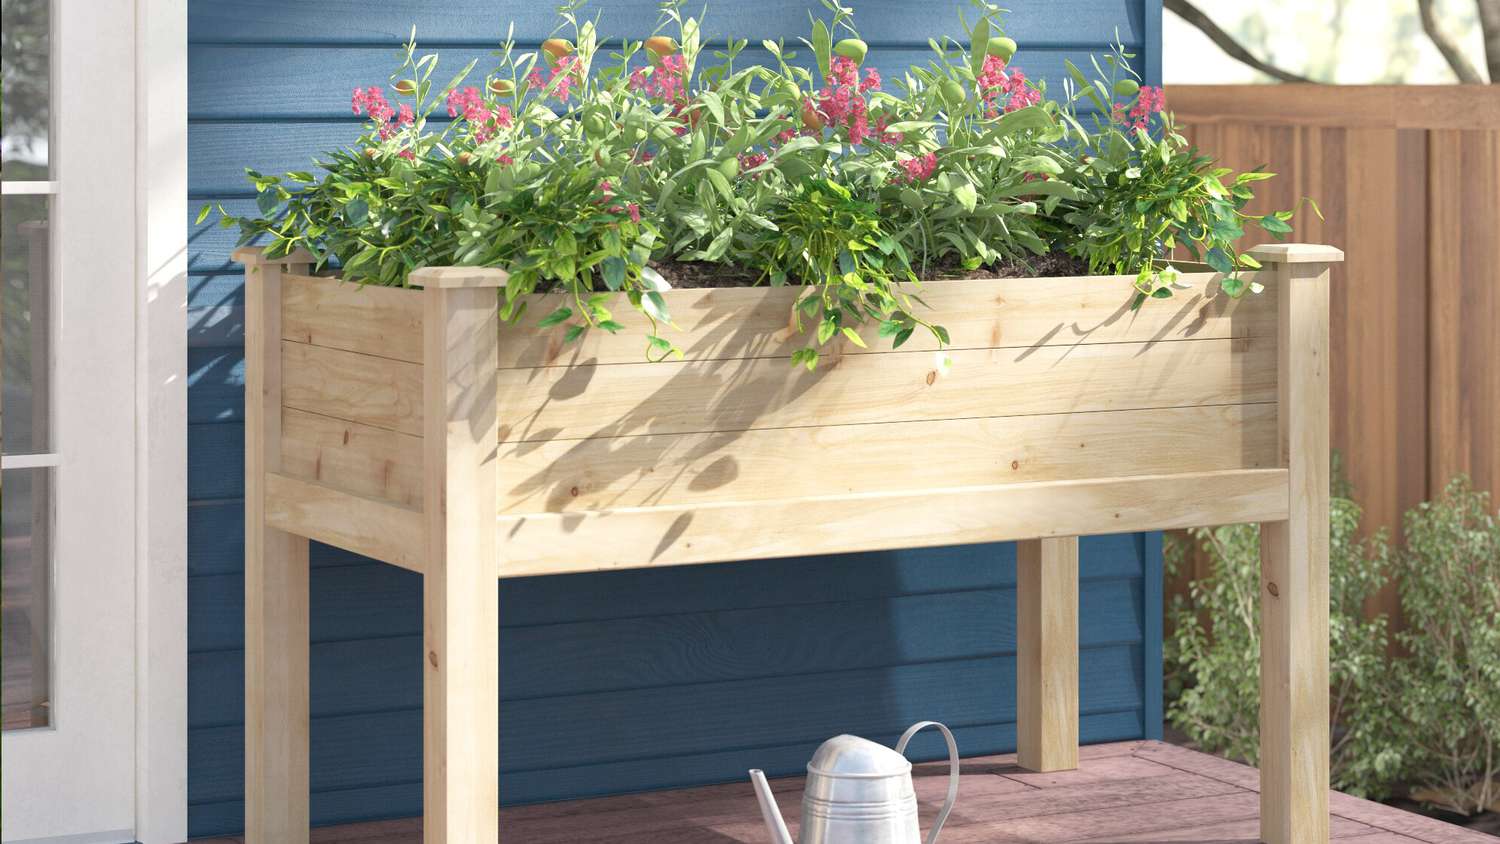 The 10 Best Raised Garden Beds In 2021, Simple Raised Garden Bed With Legs